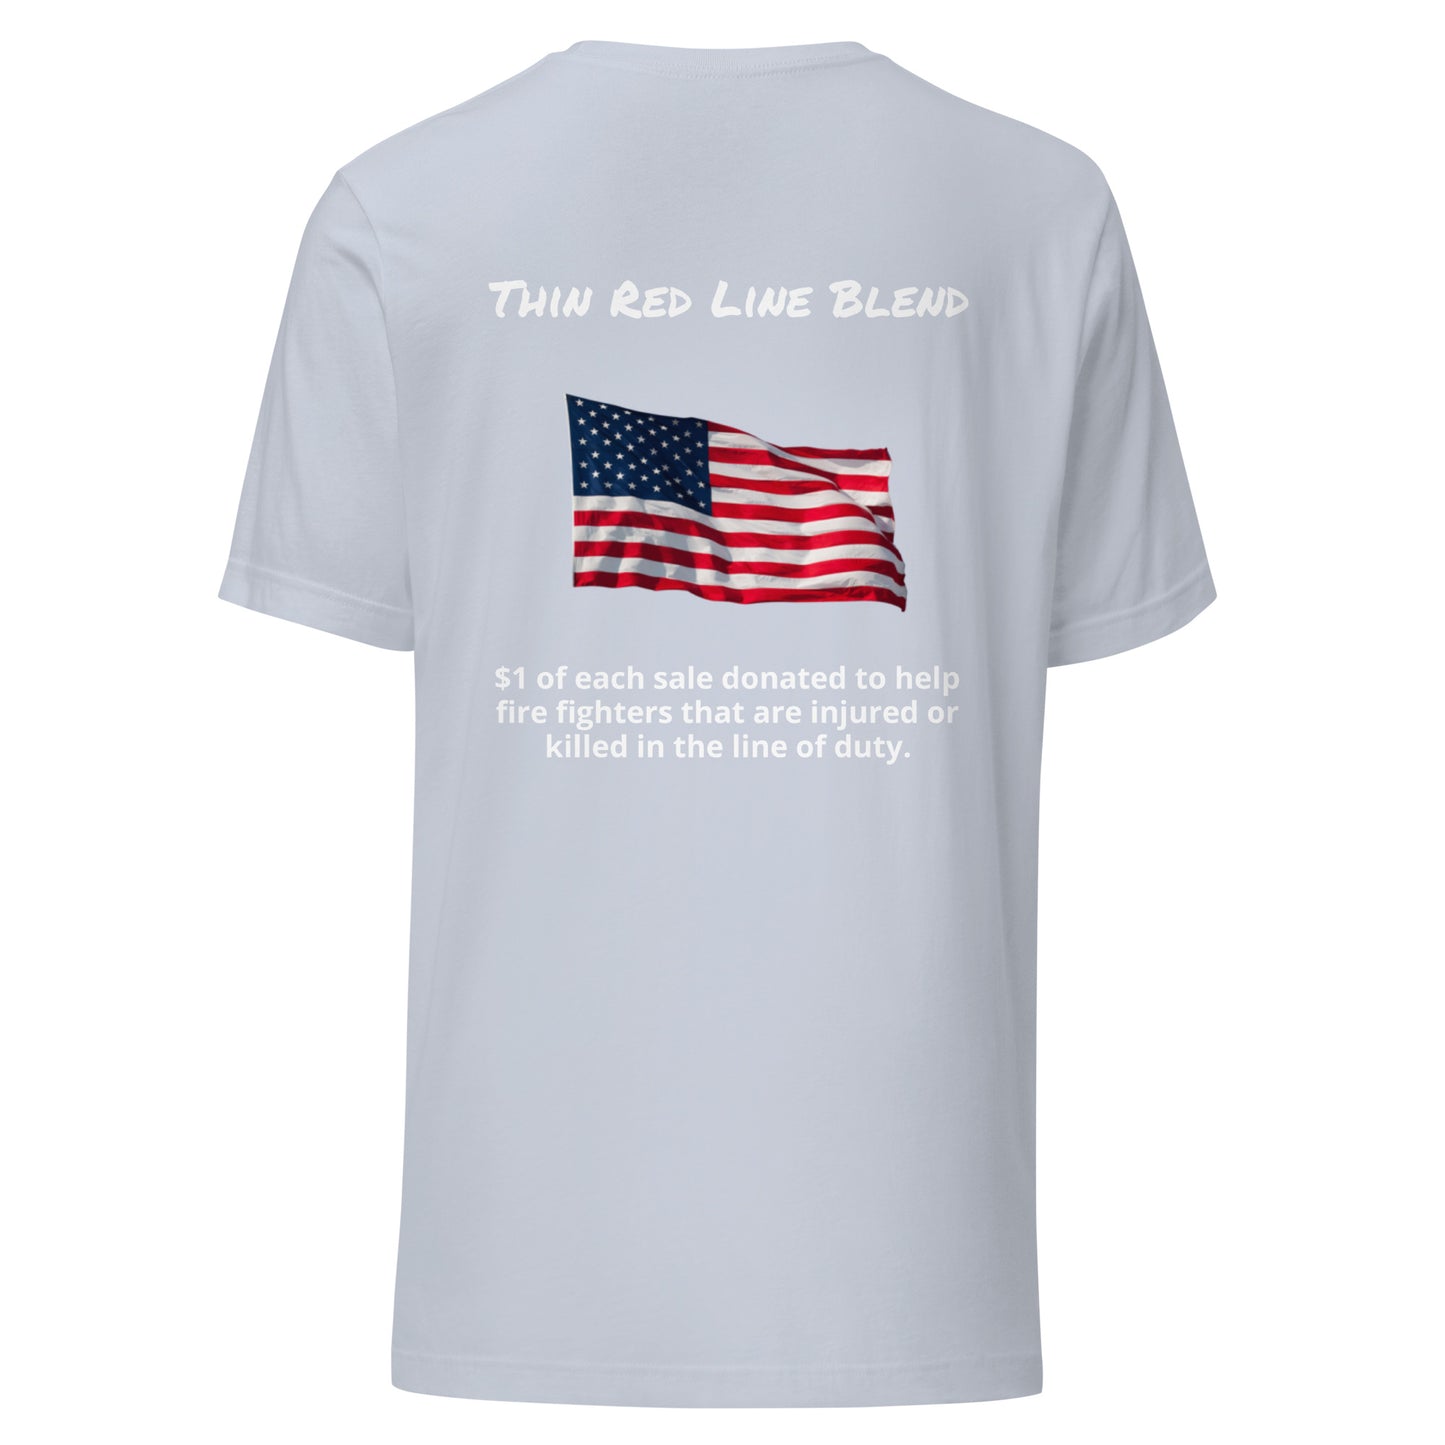 Thin Red Line Blend (White Lettering) t-shirt